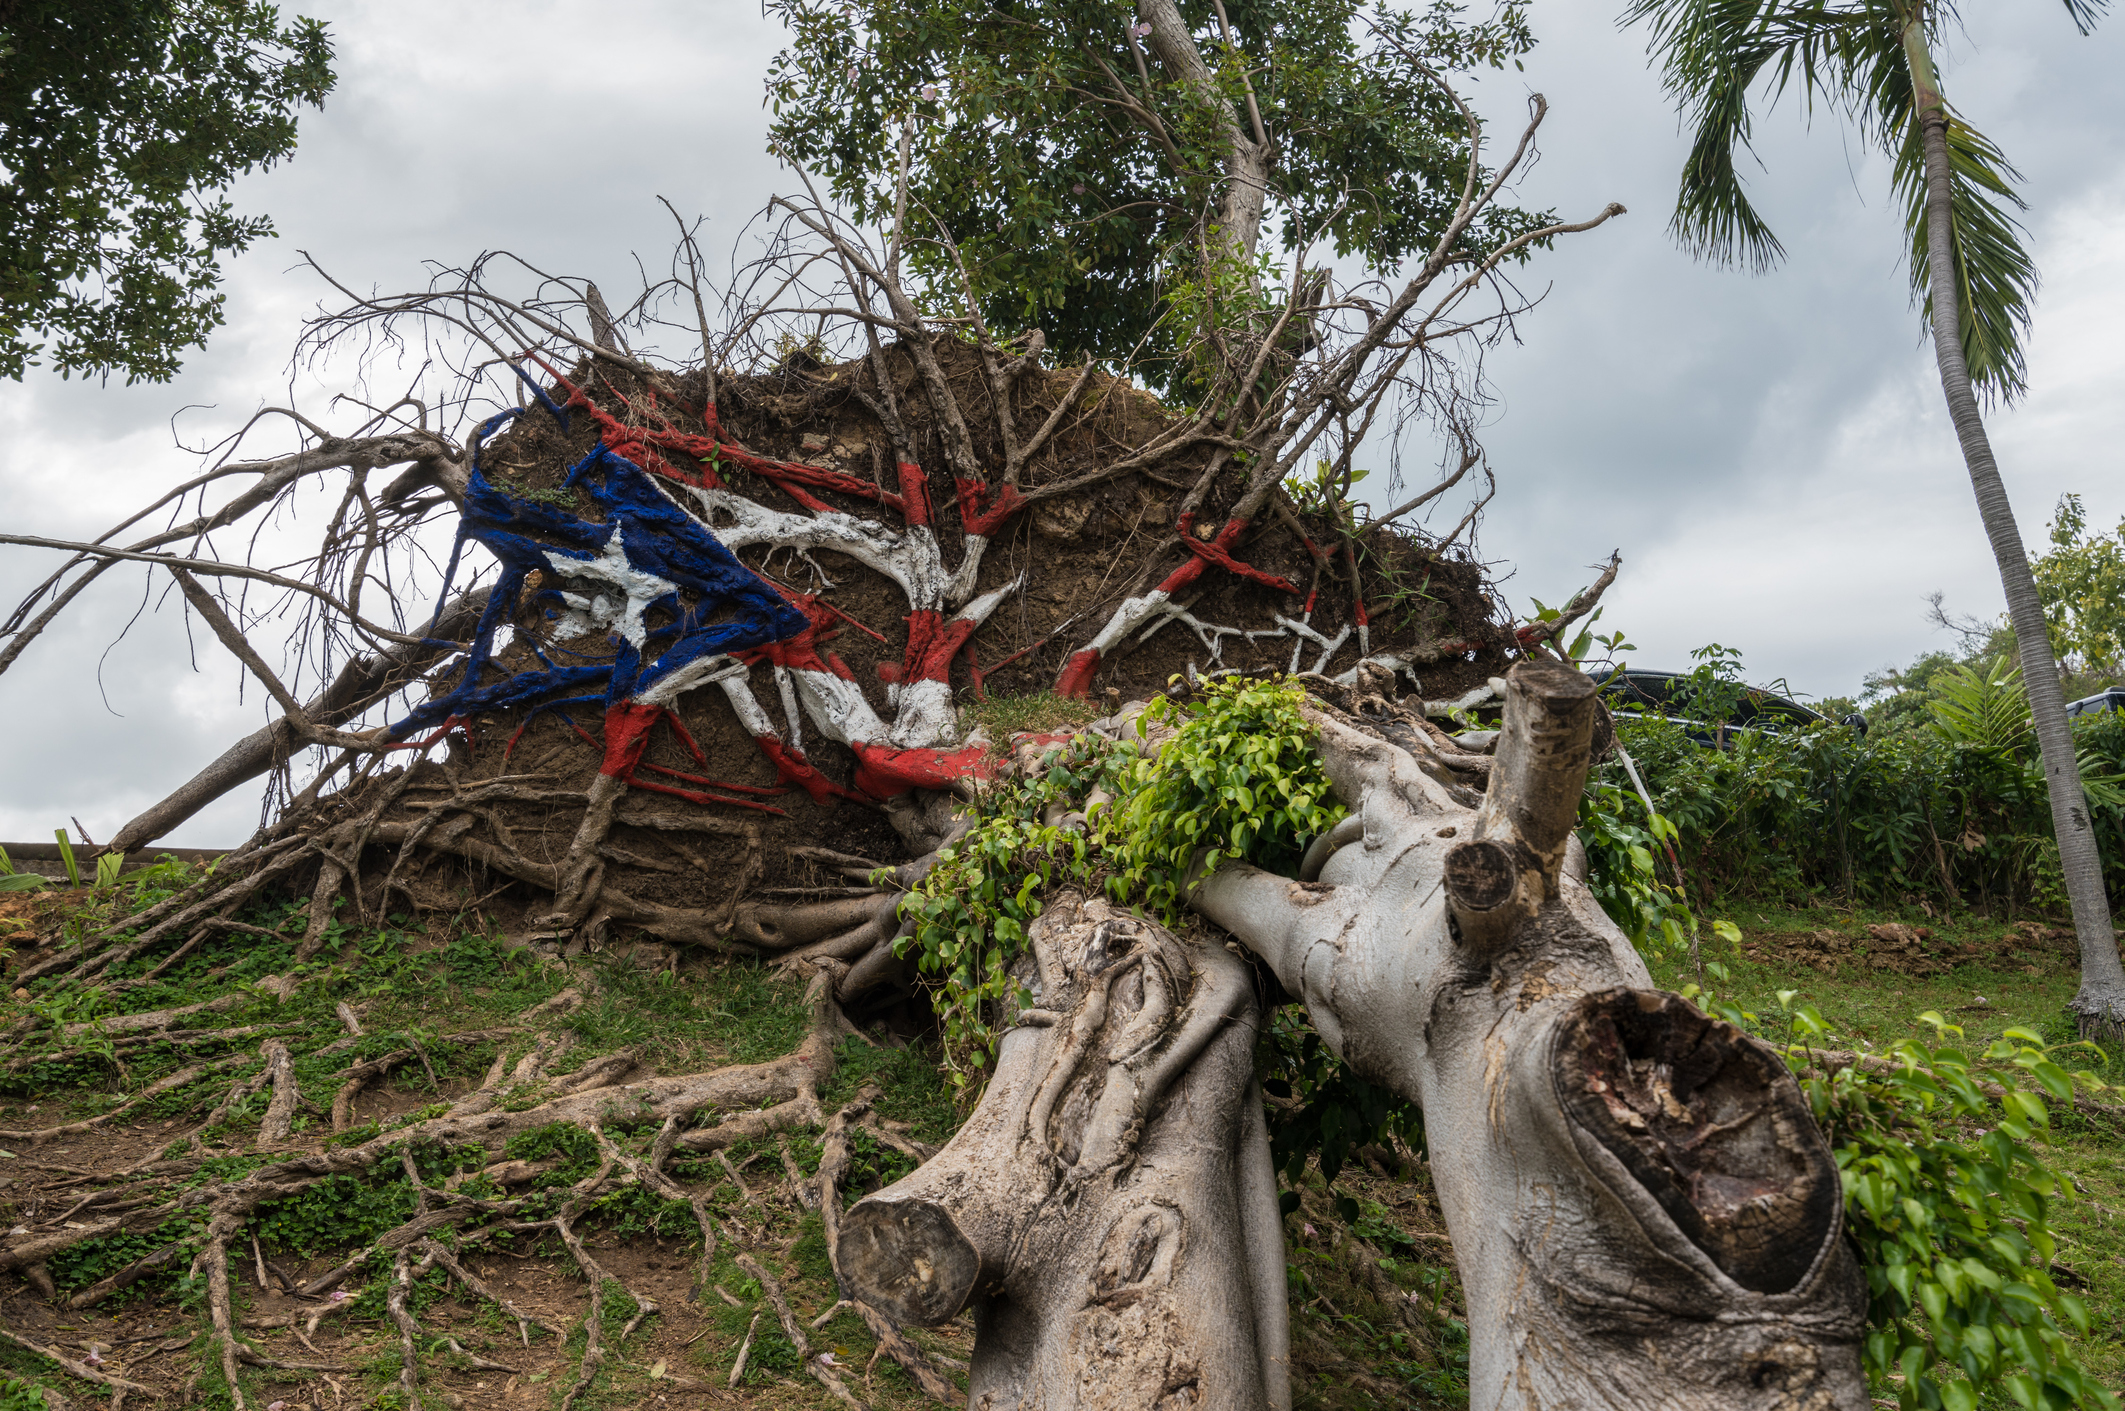 Uprooted tree from Hurricane Maria in Puerto Rico.